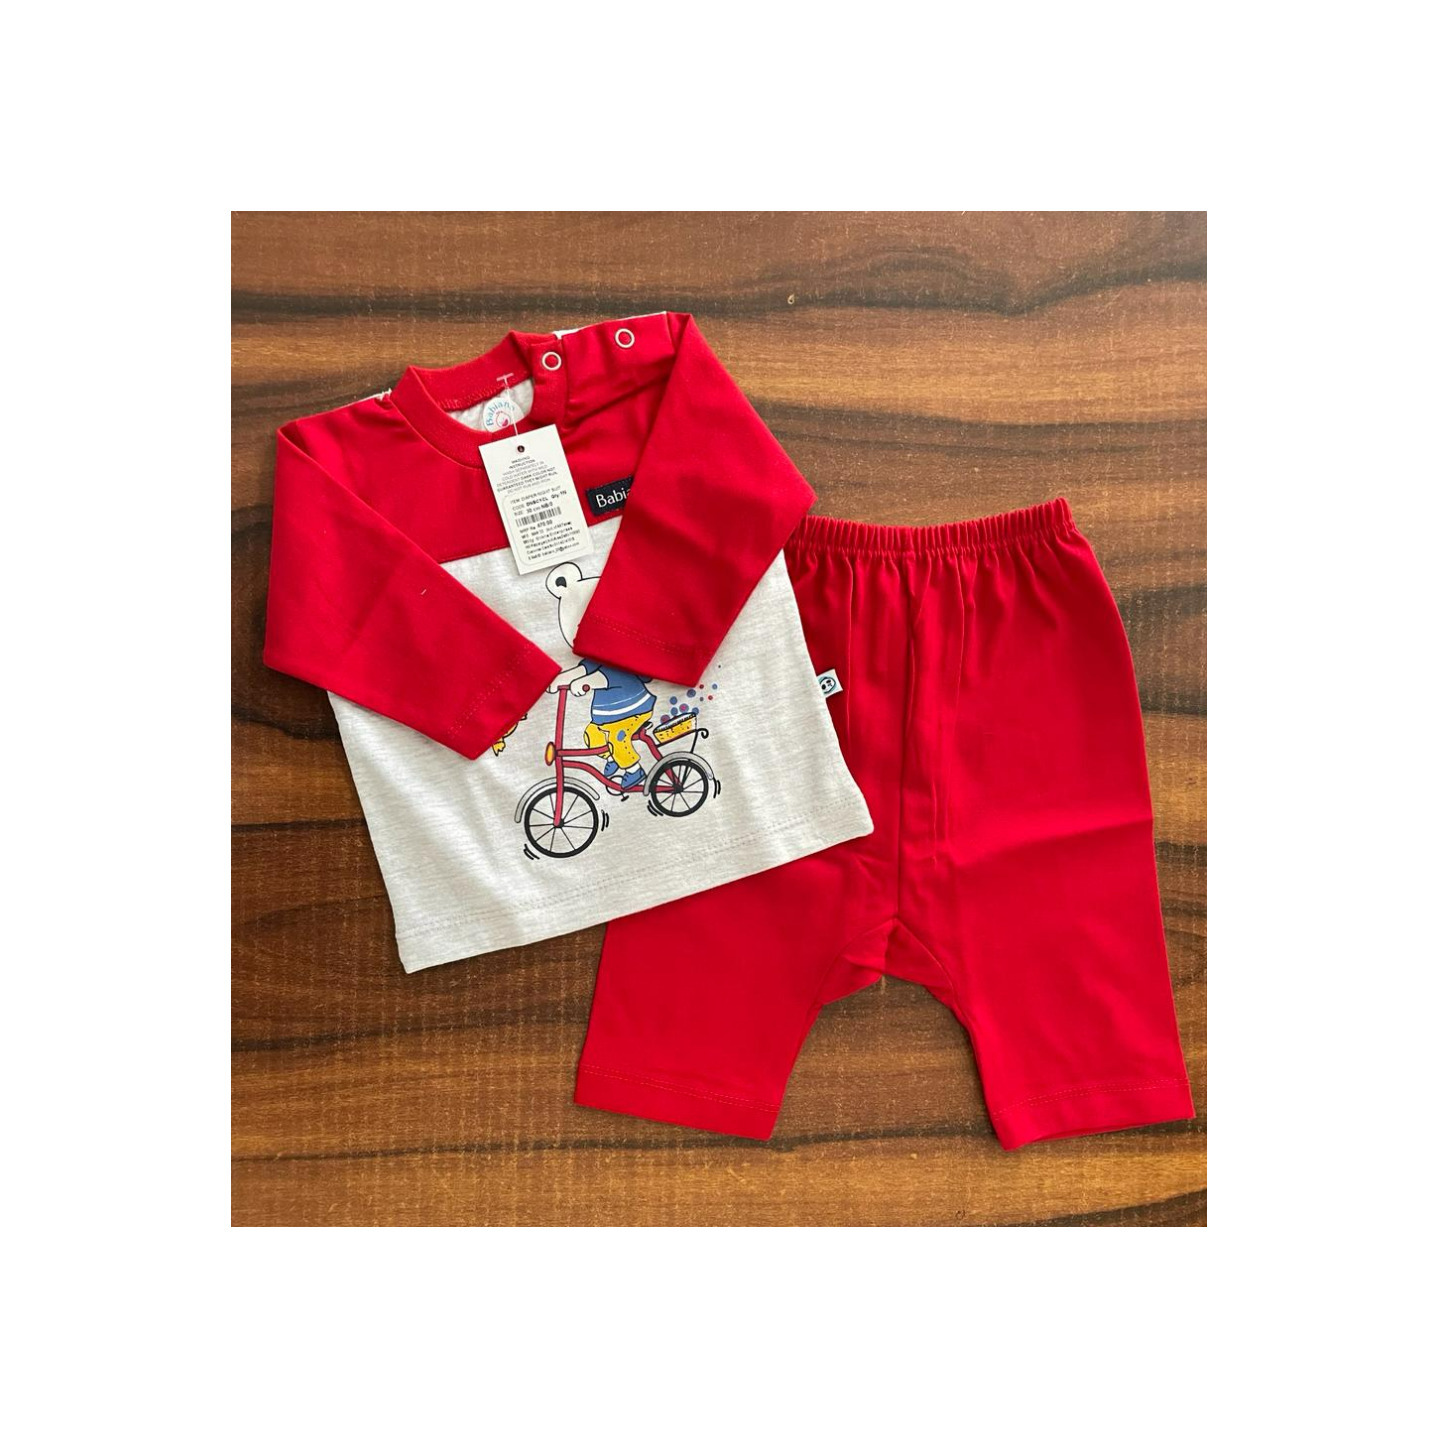 Babiano Daiper Pajama Sets Rs 450 Only NB to 1 Year